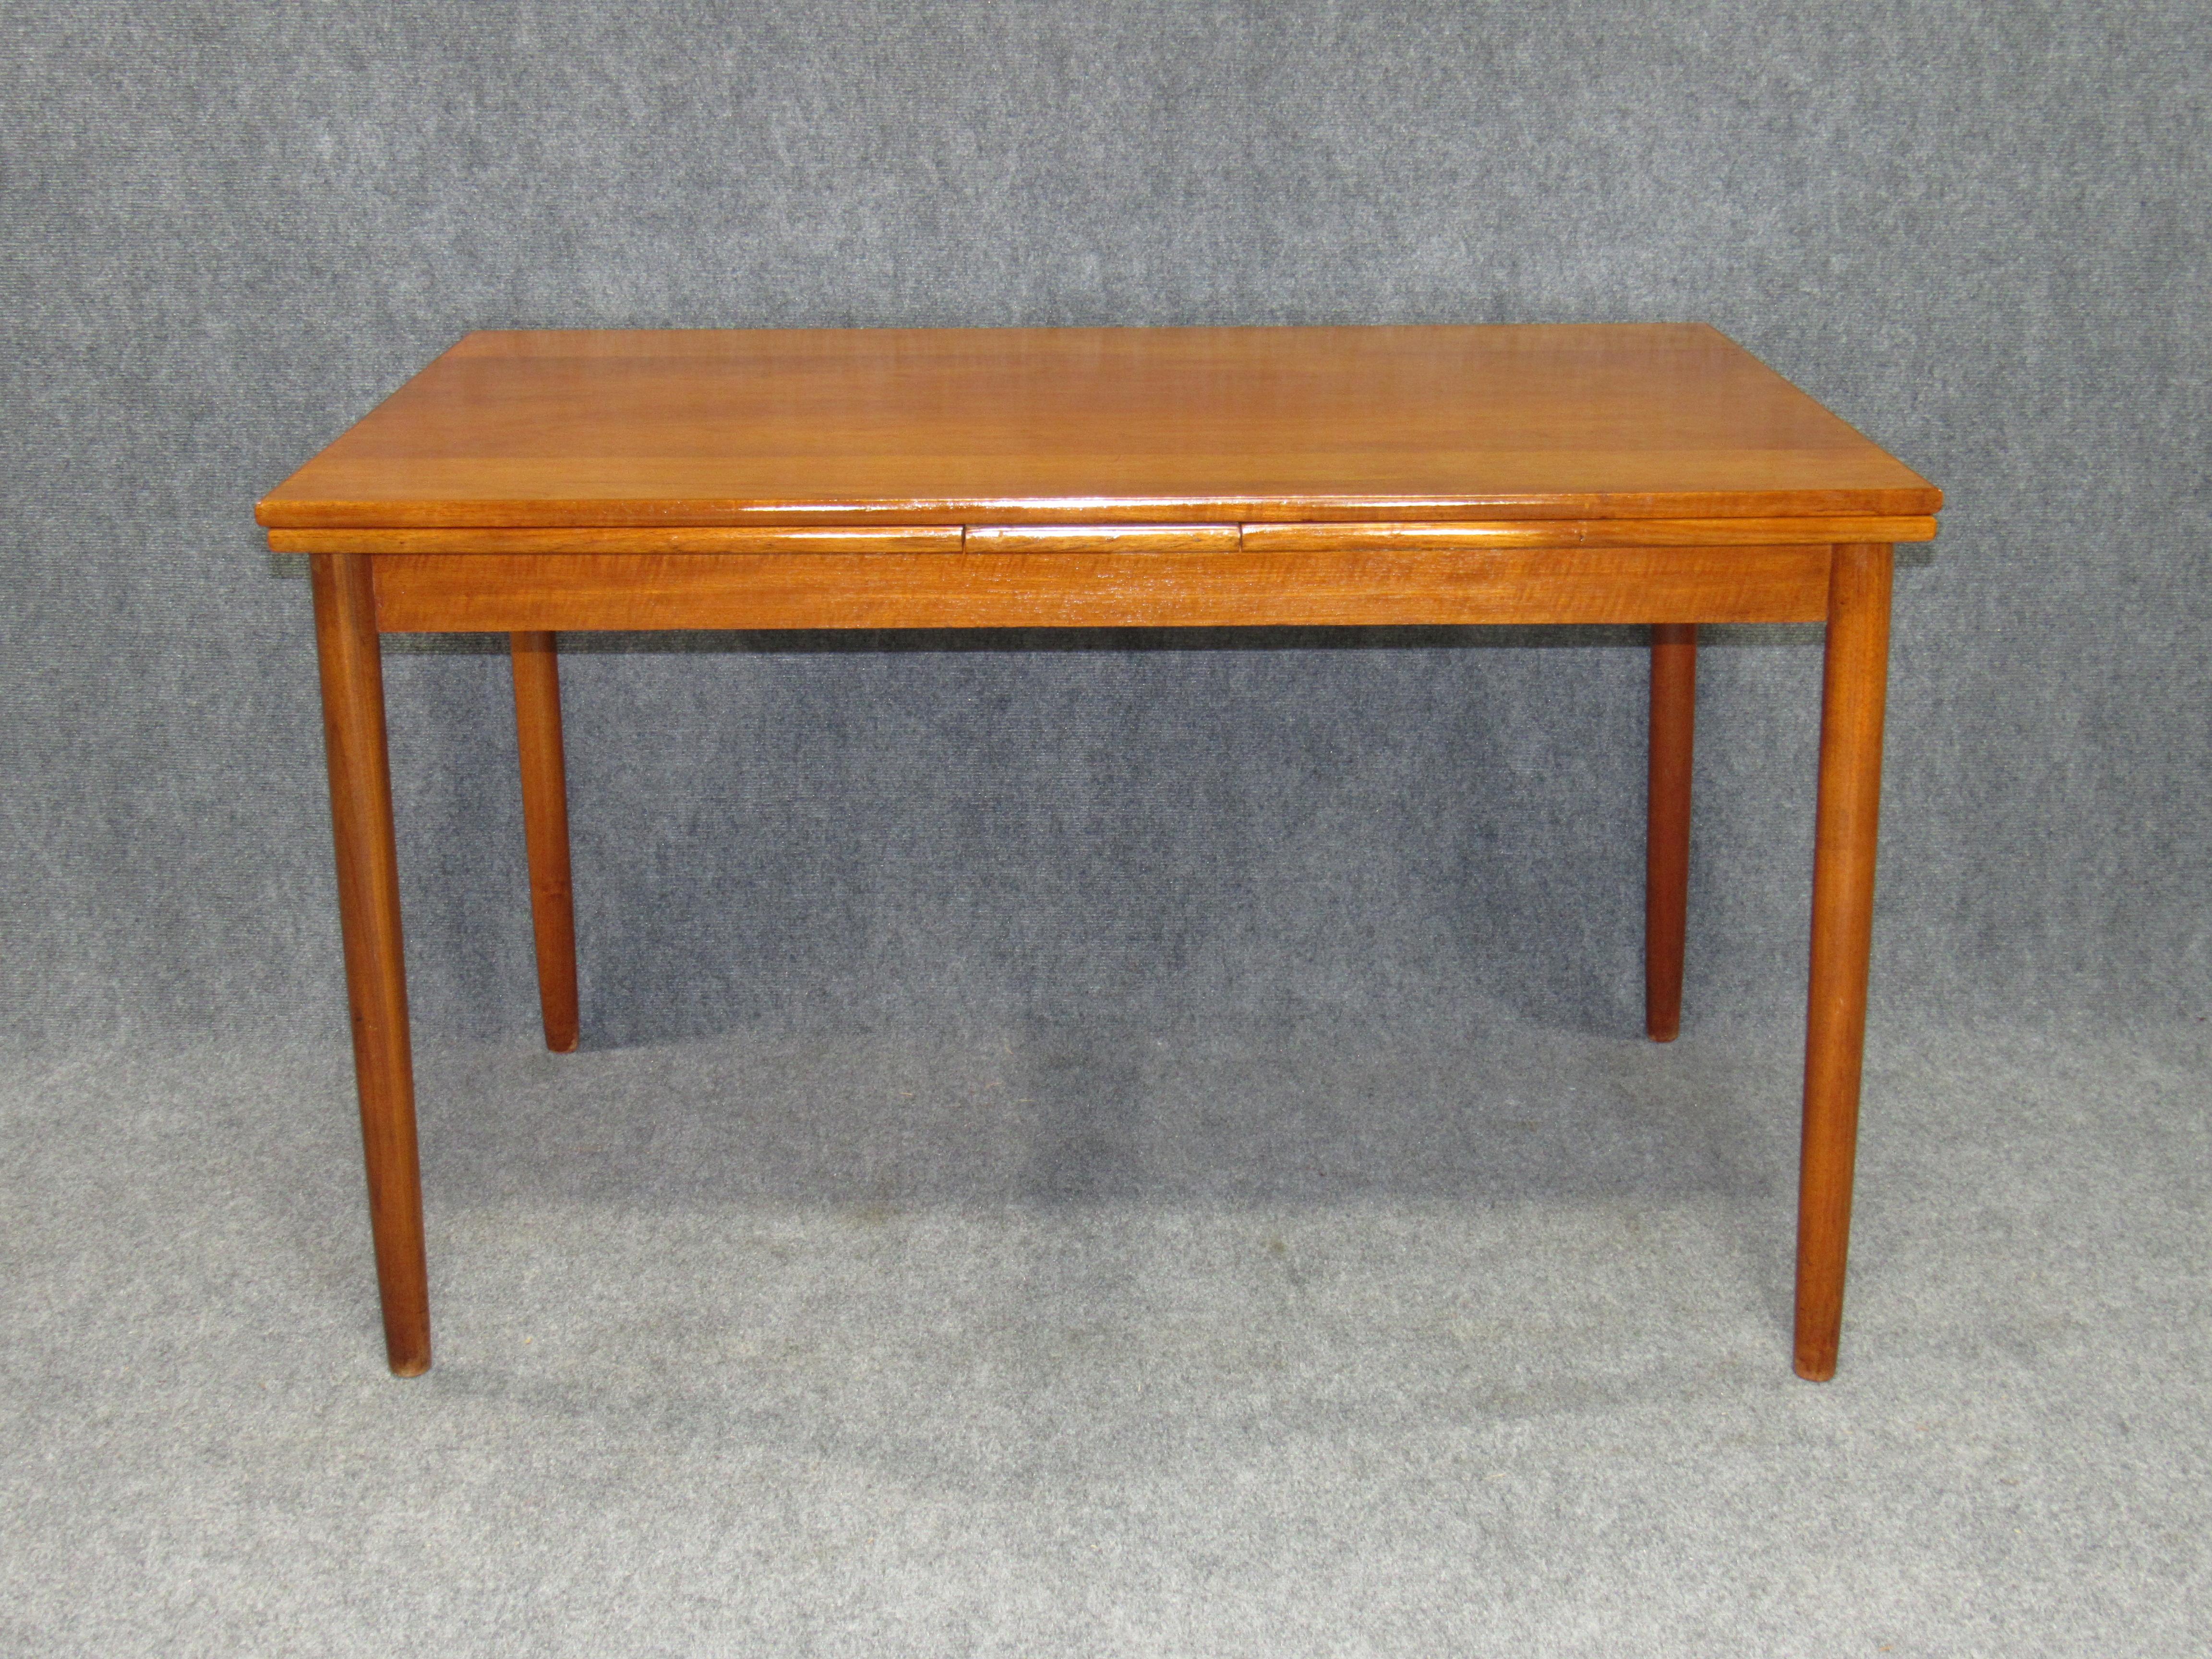 Danish modern teak dining table with pull out leaves. Dimensions are 47.5